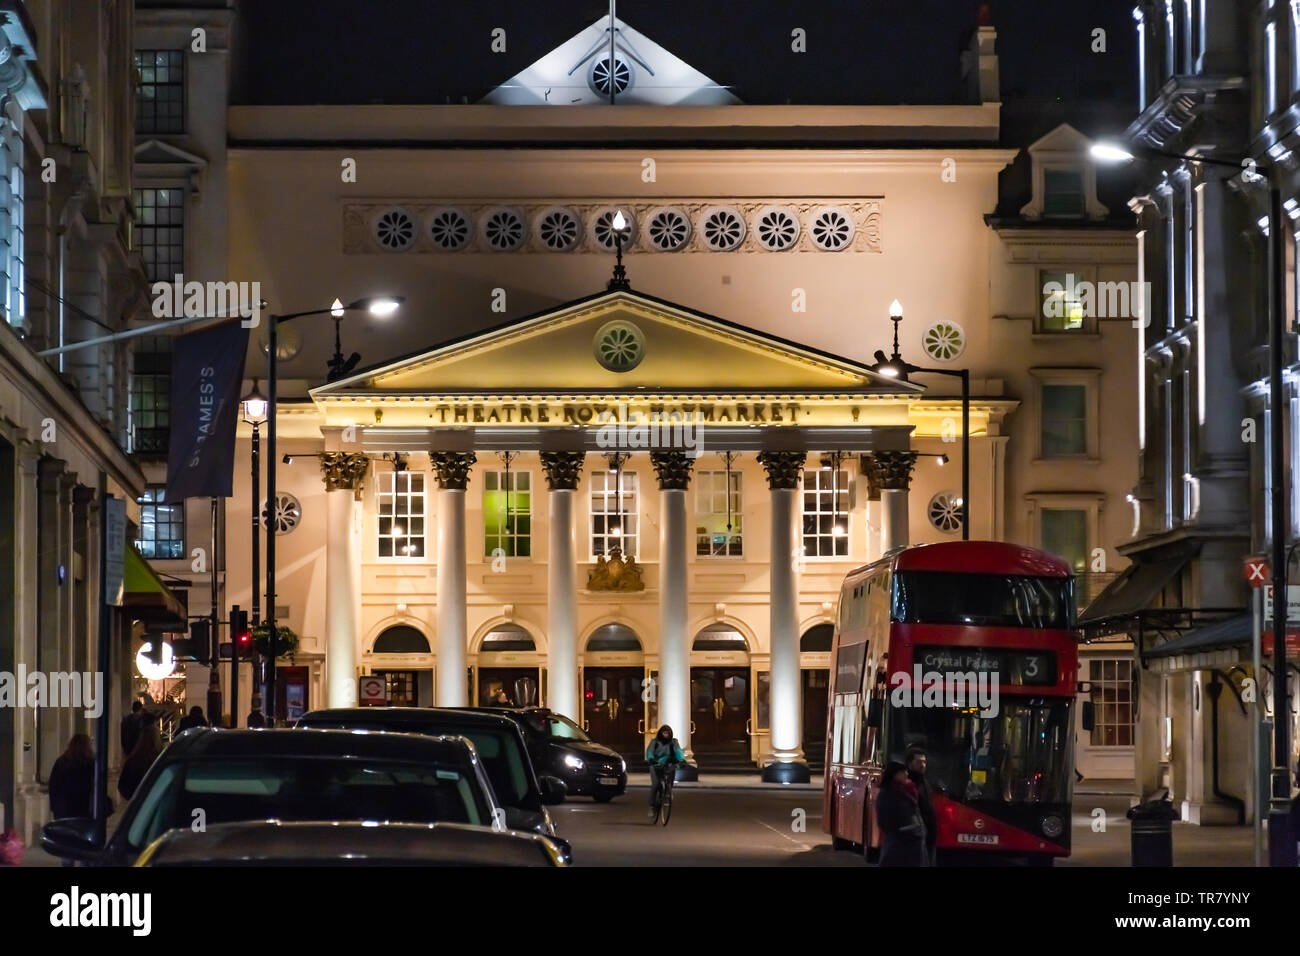 London, view of Waterloo square at night Stock Photo